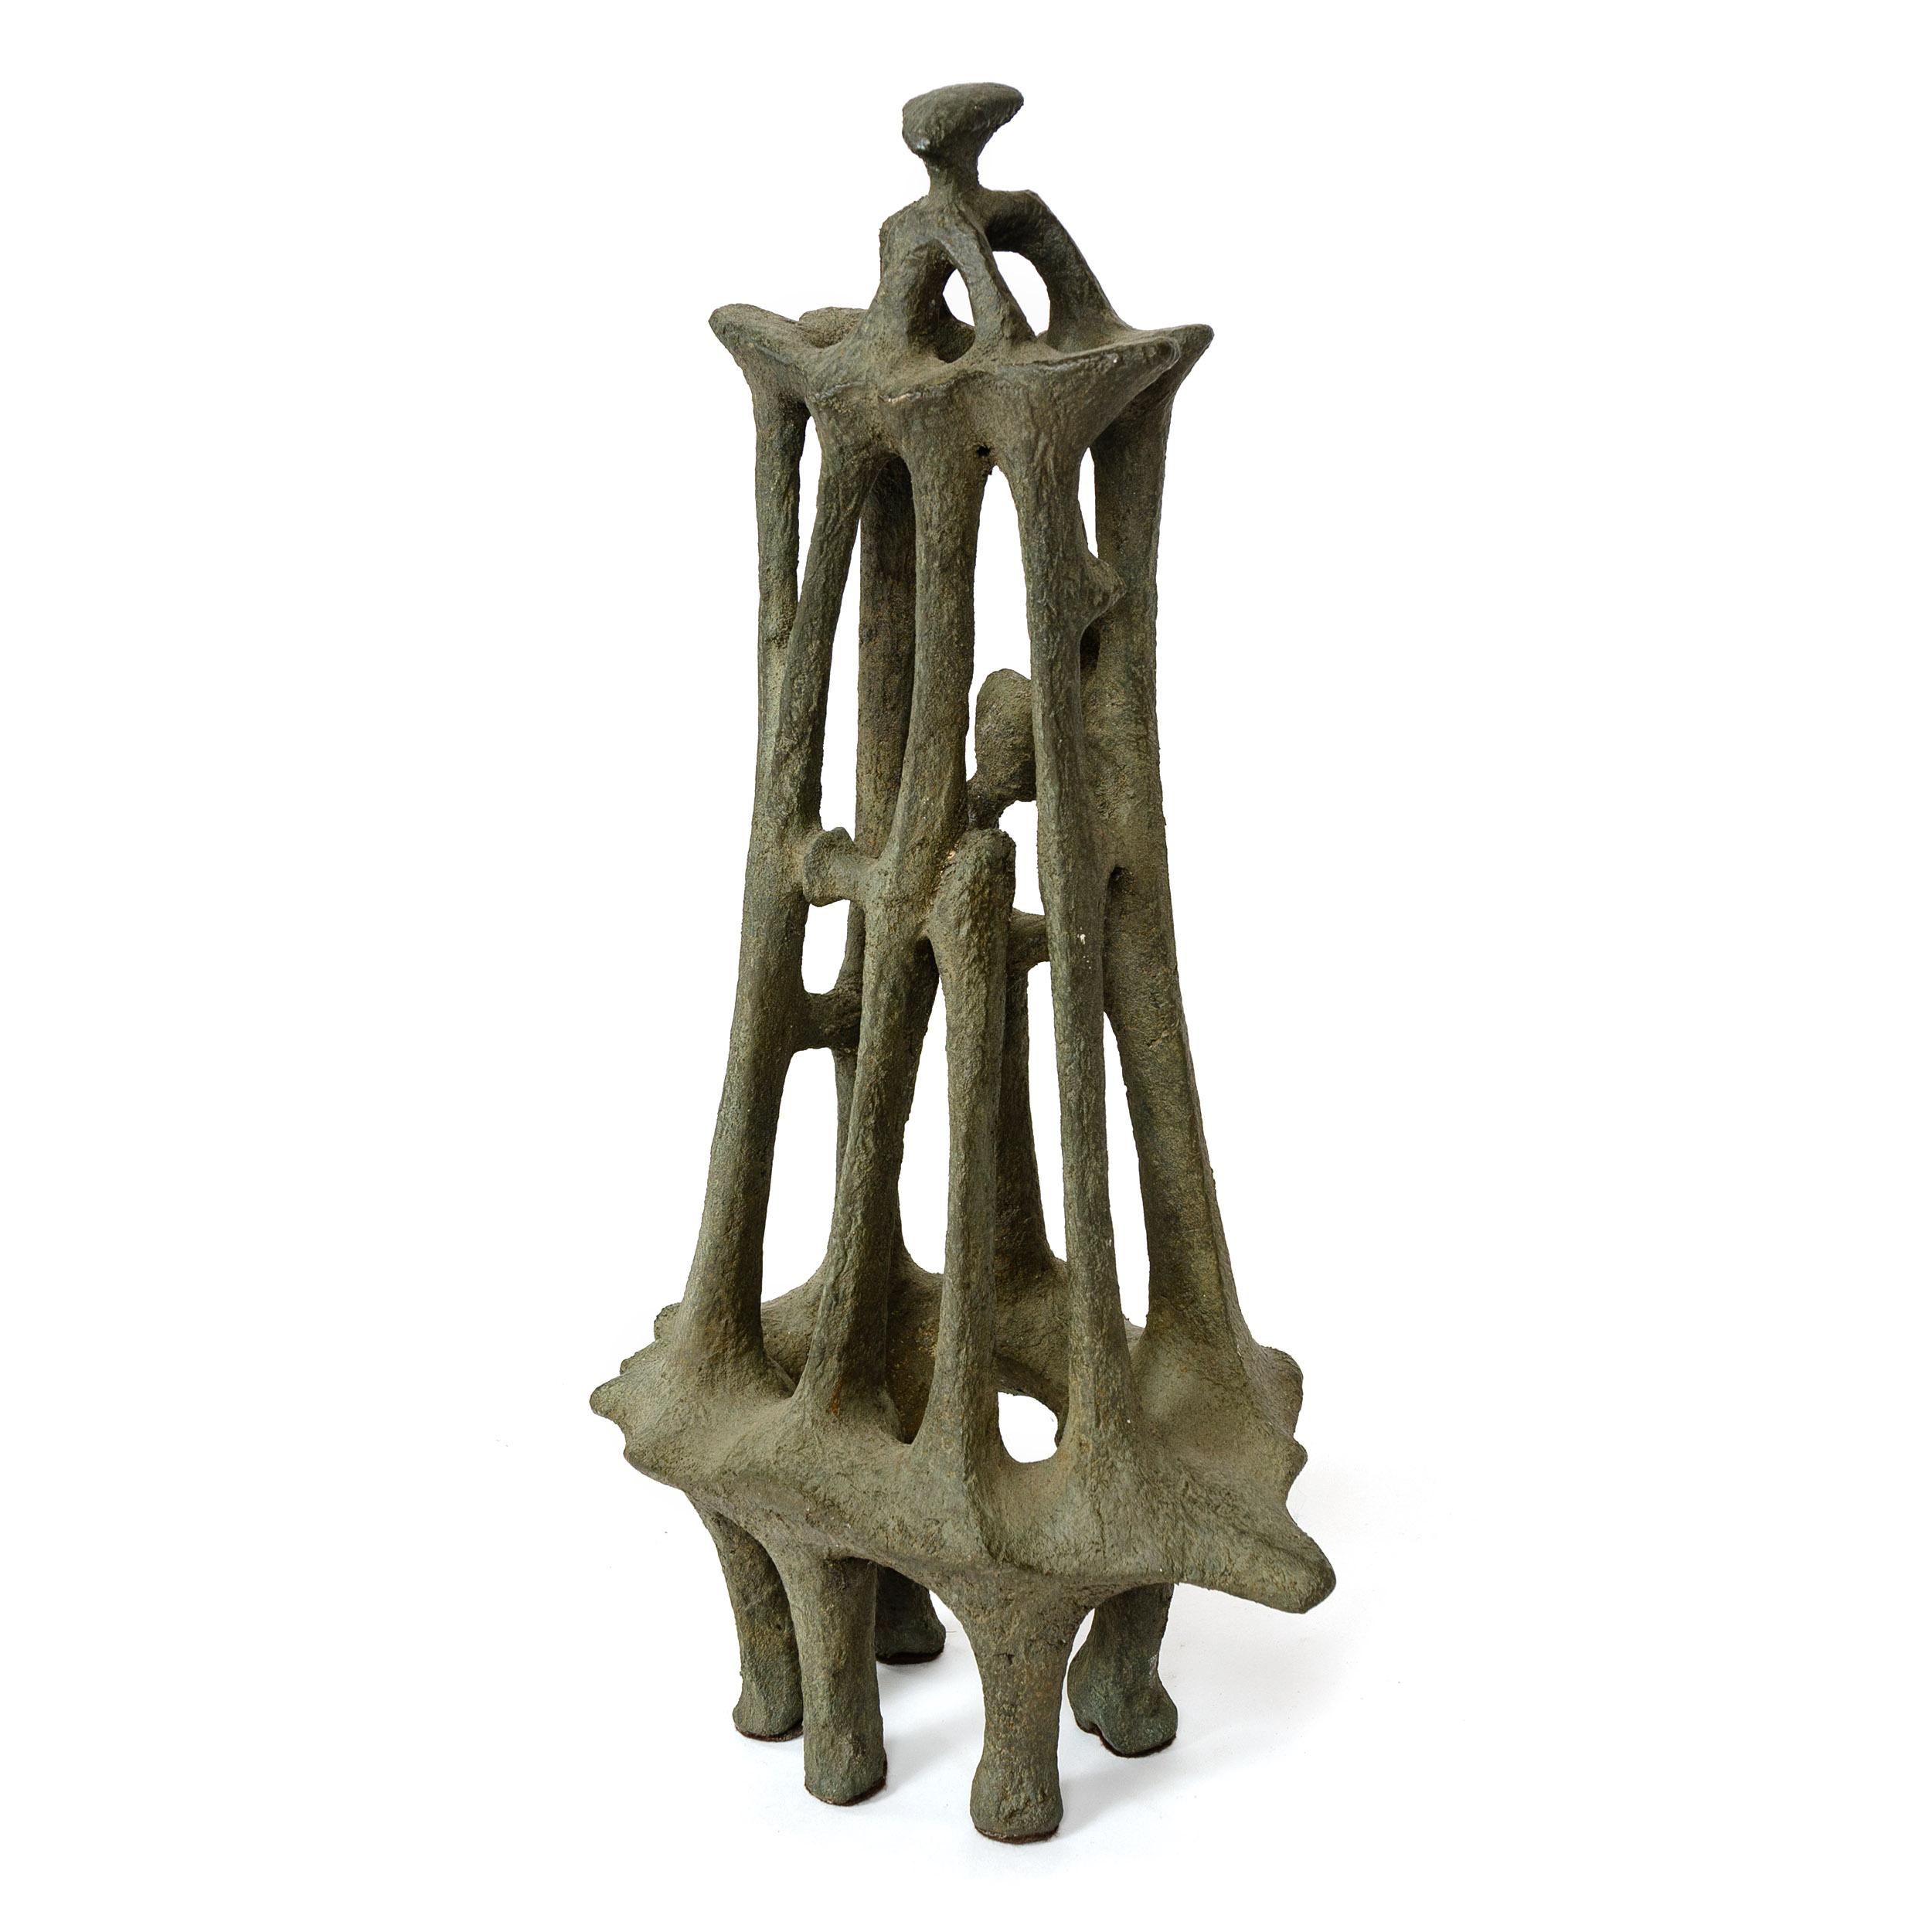 An unsigned vintage cast bronze abstract sculpture with natural patina.